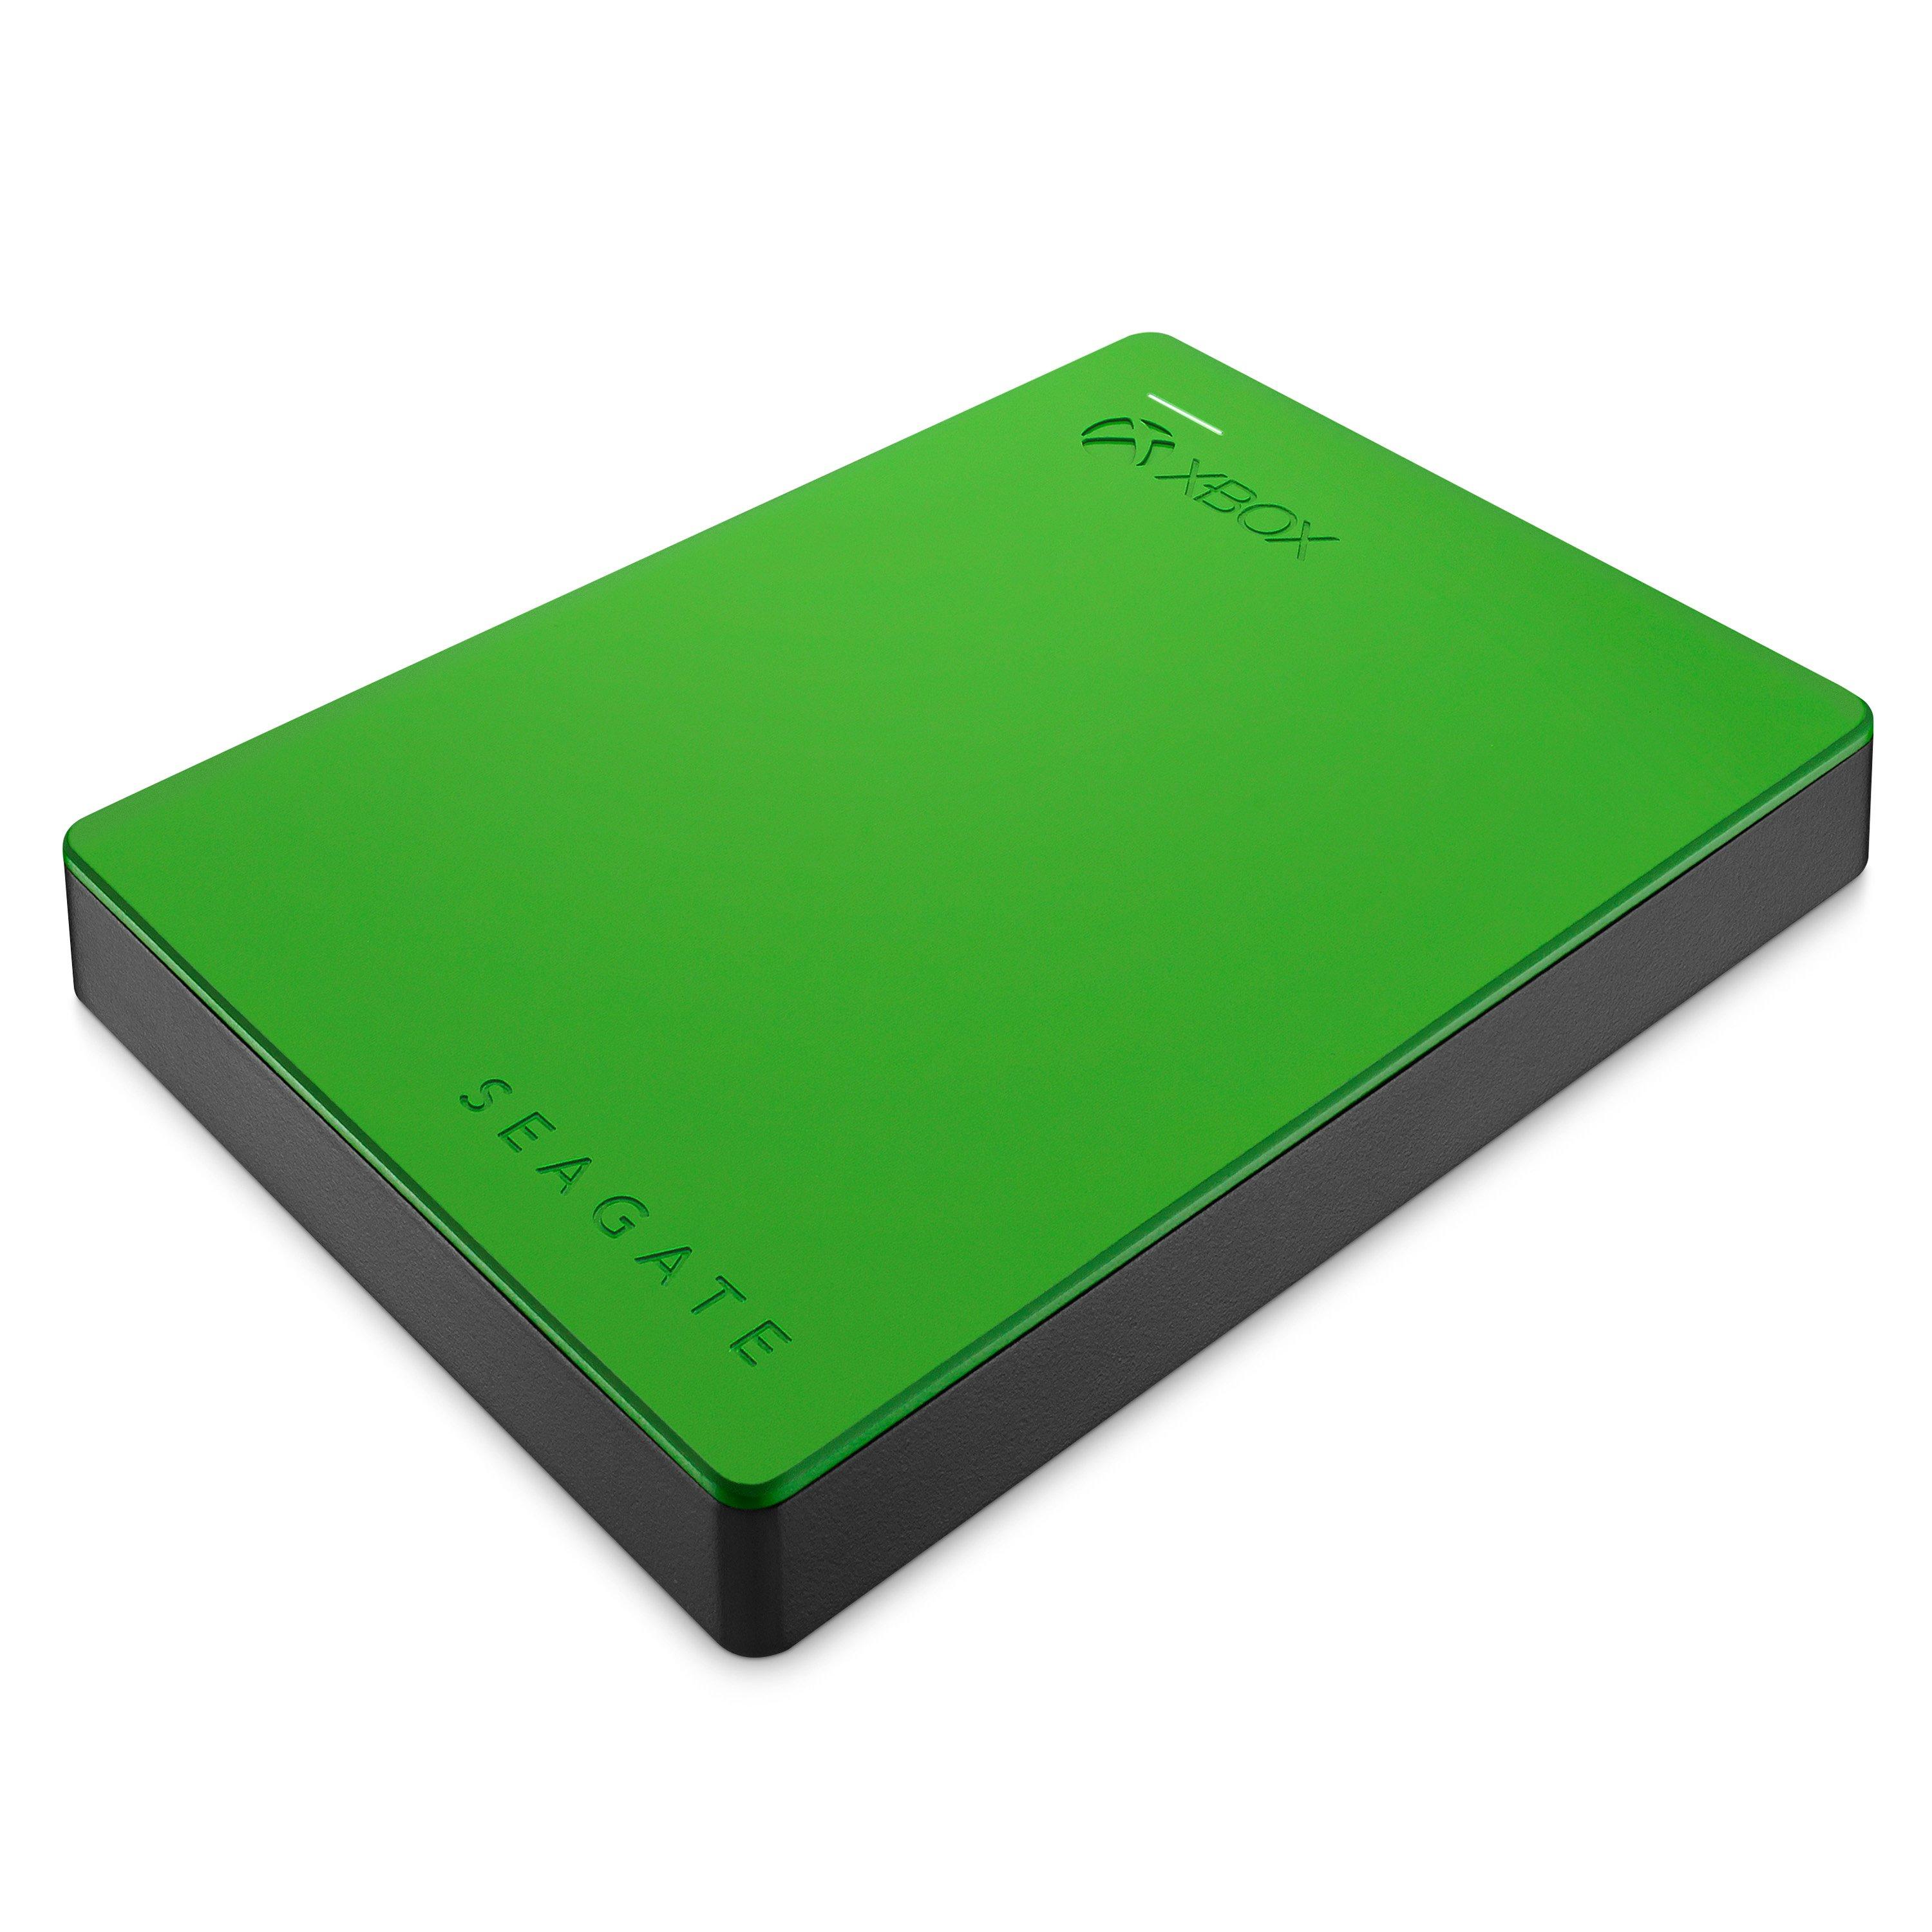 1 terabyte hard drive for xbox one